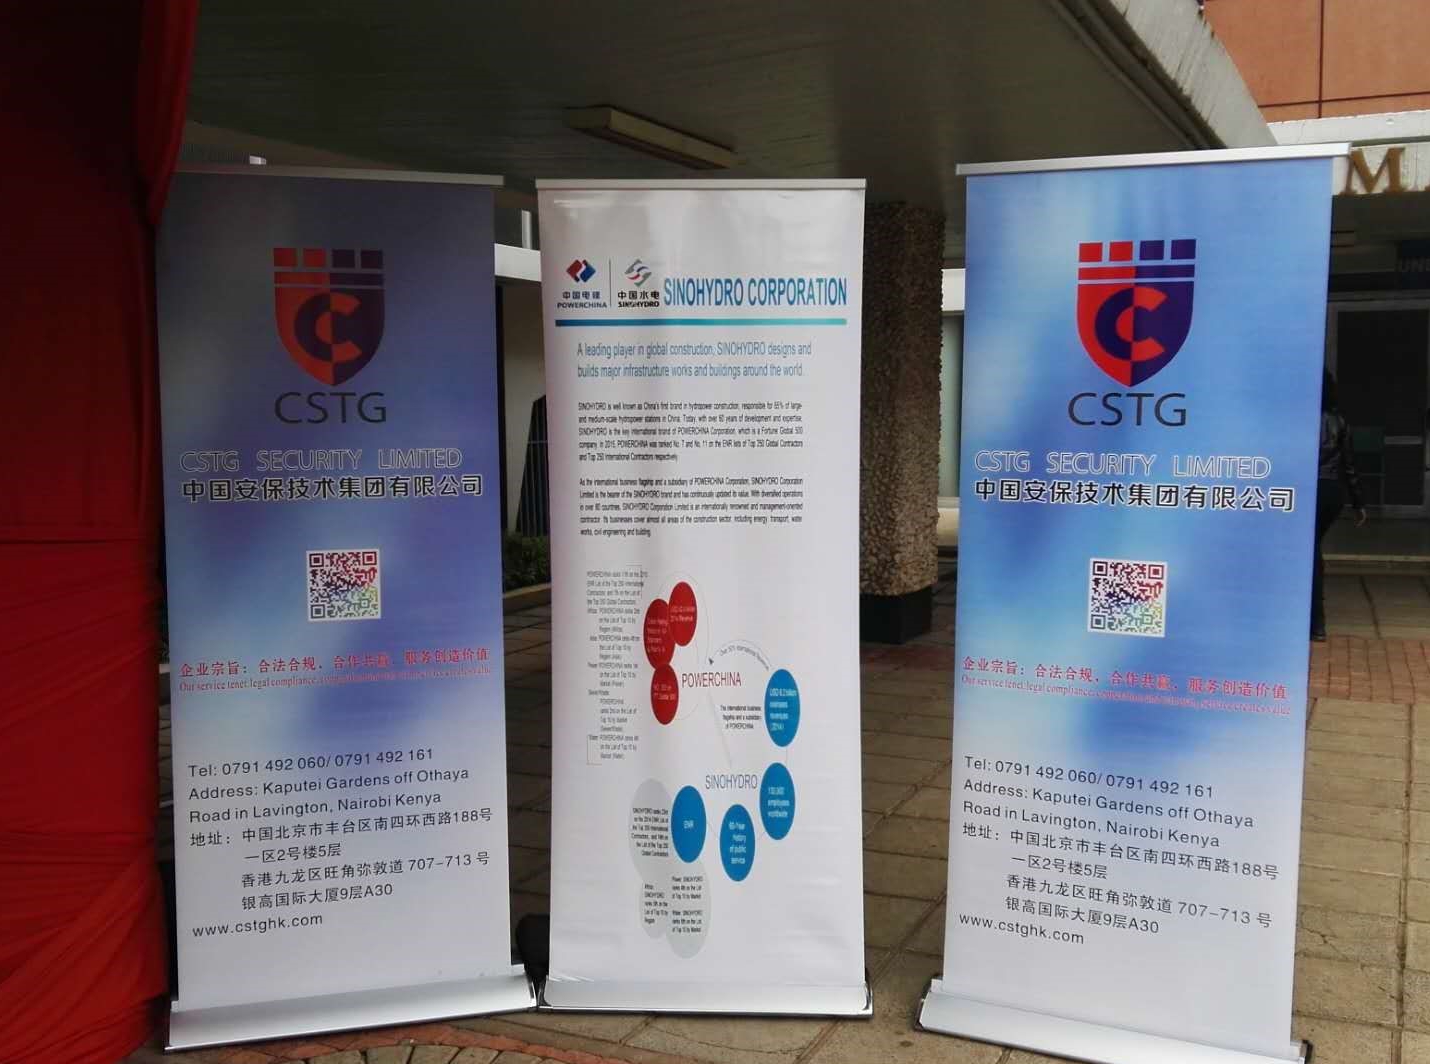 The Kenyan subsidiary of CSTG provided security services for the Shenzhen Arts Troupe at the University of Nairobi